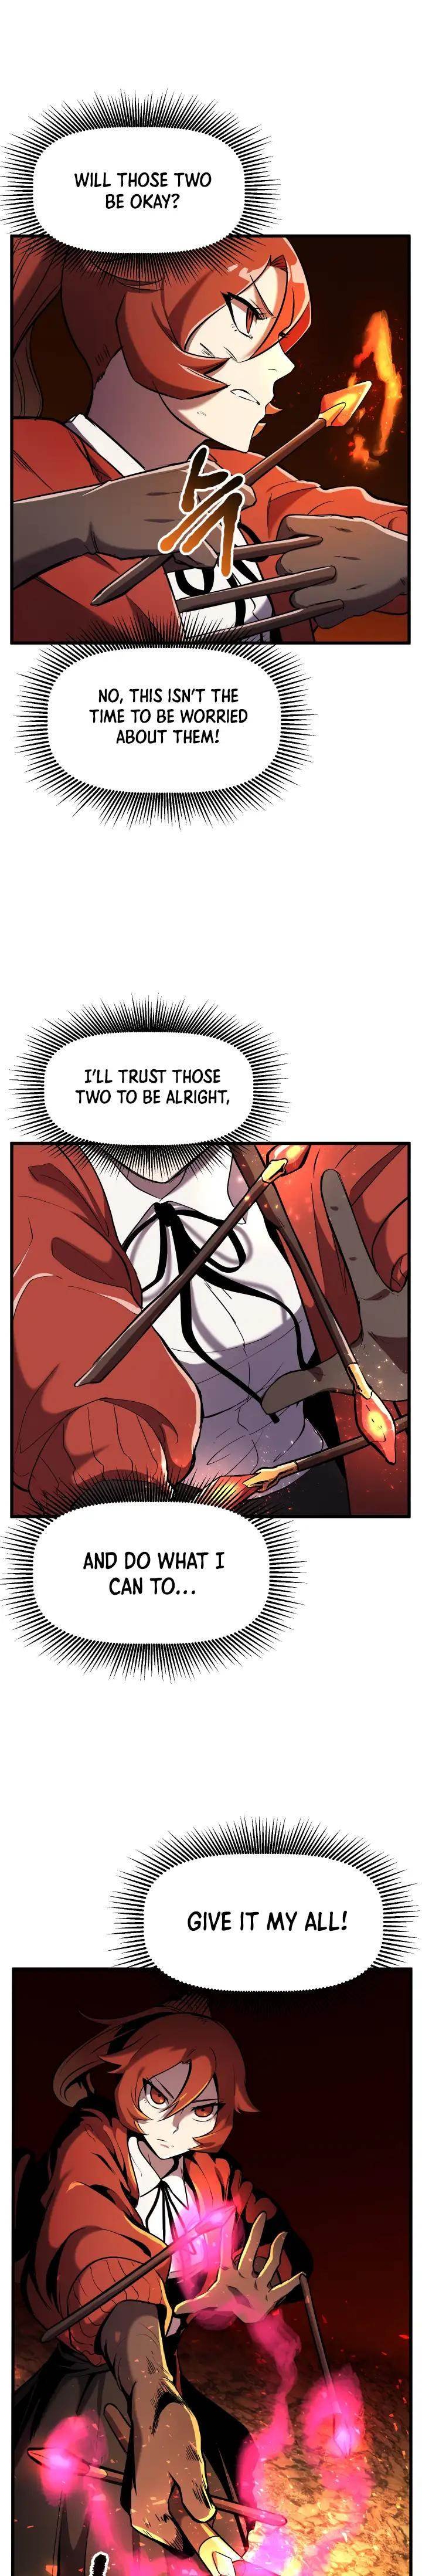 survival-story-of-a-sword-king-in-a-fantasy-world-chap-39-16